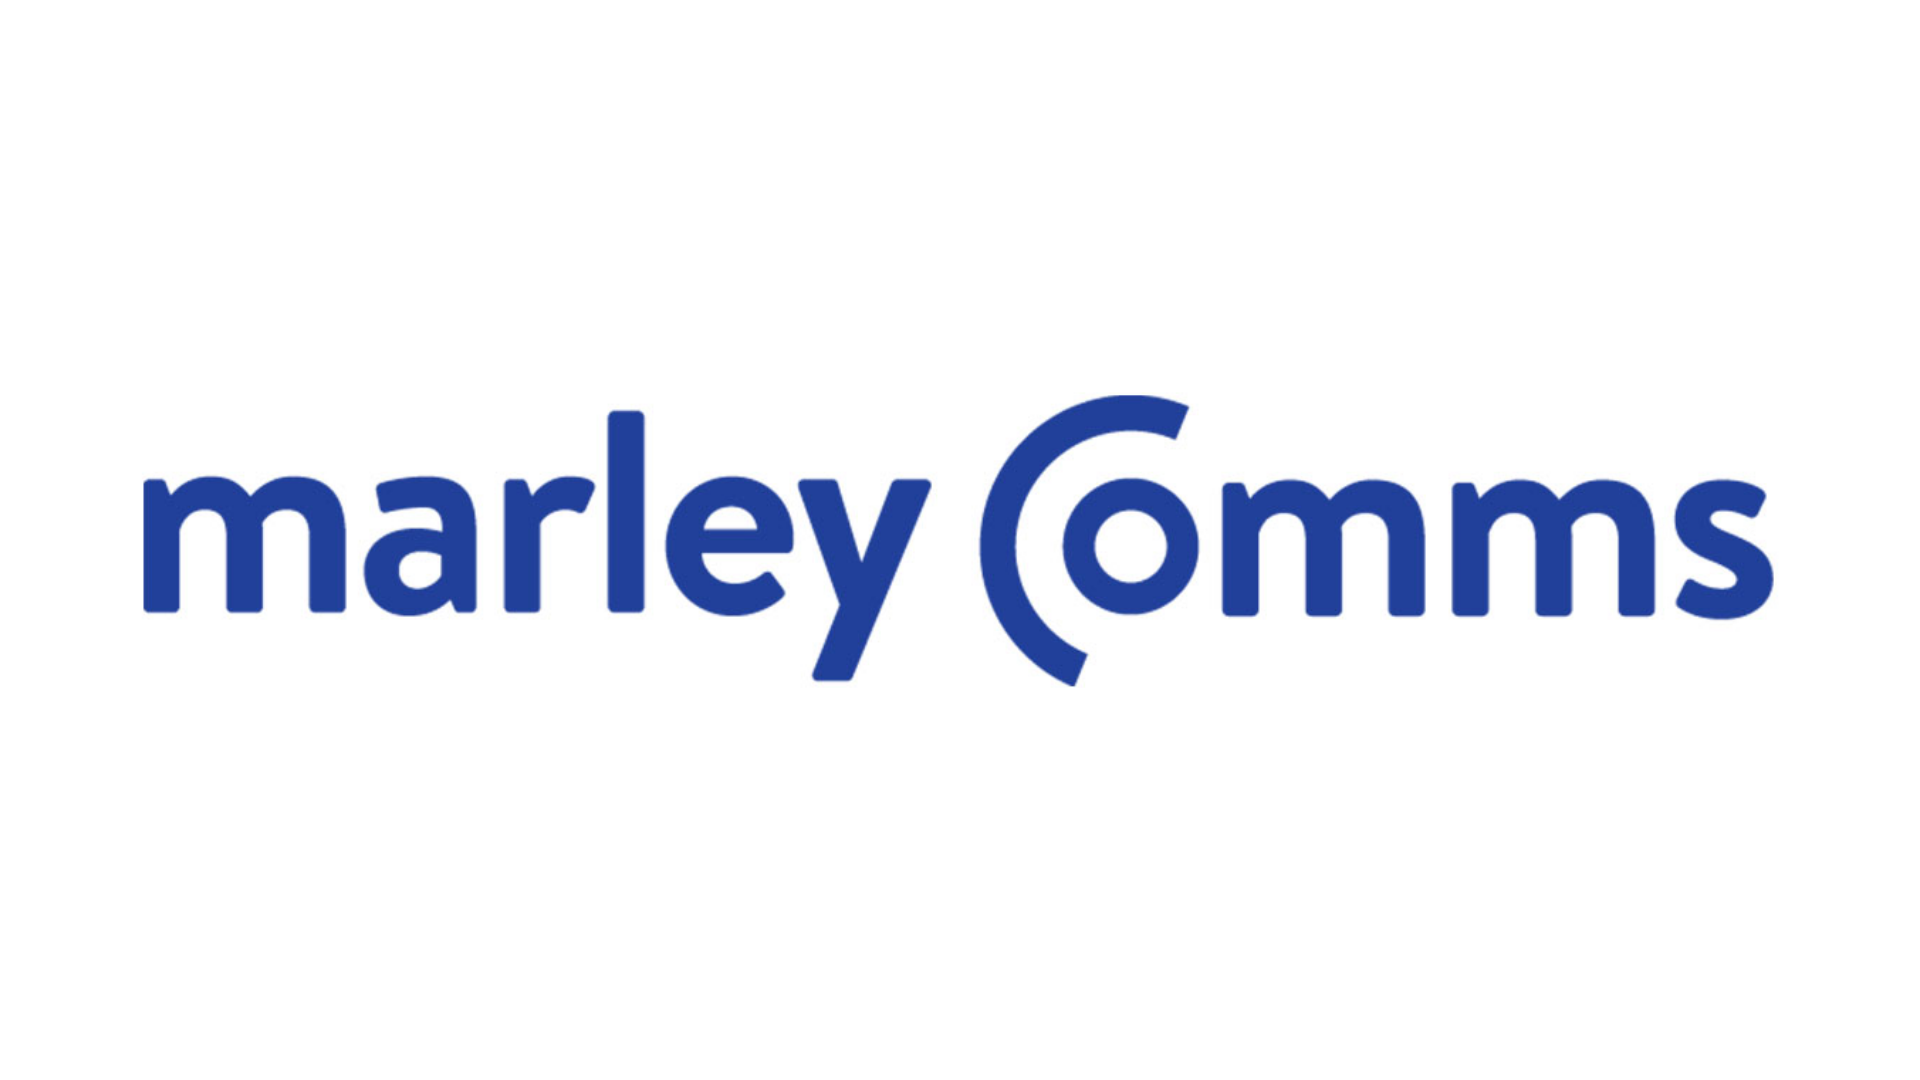 Marley Comms 